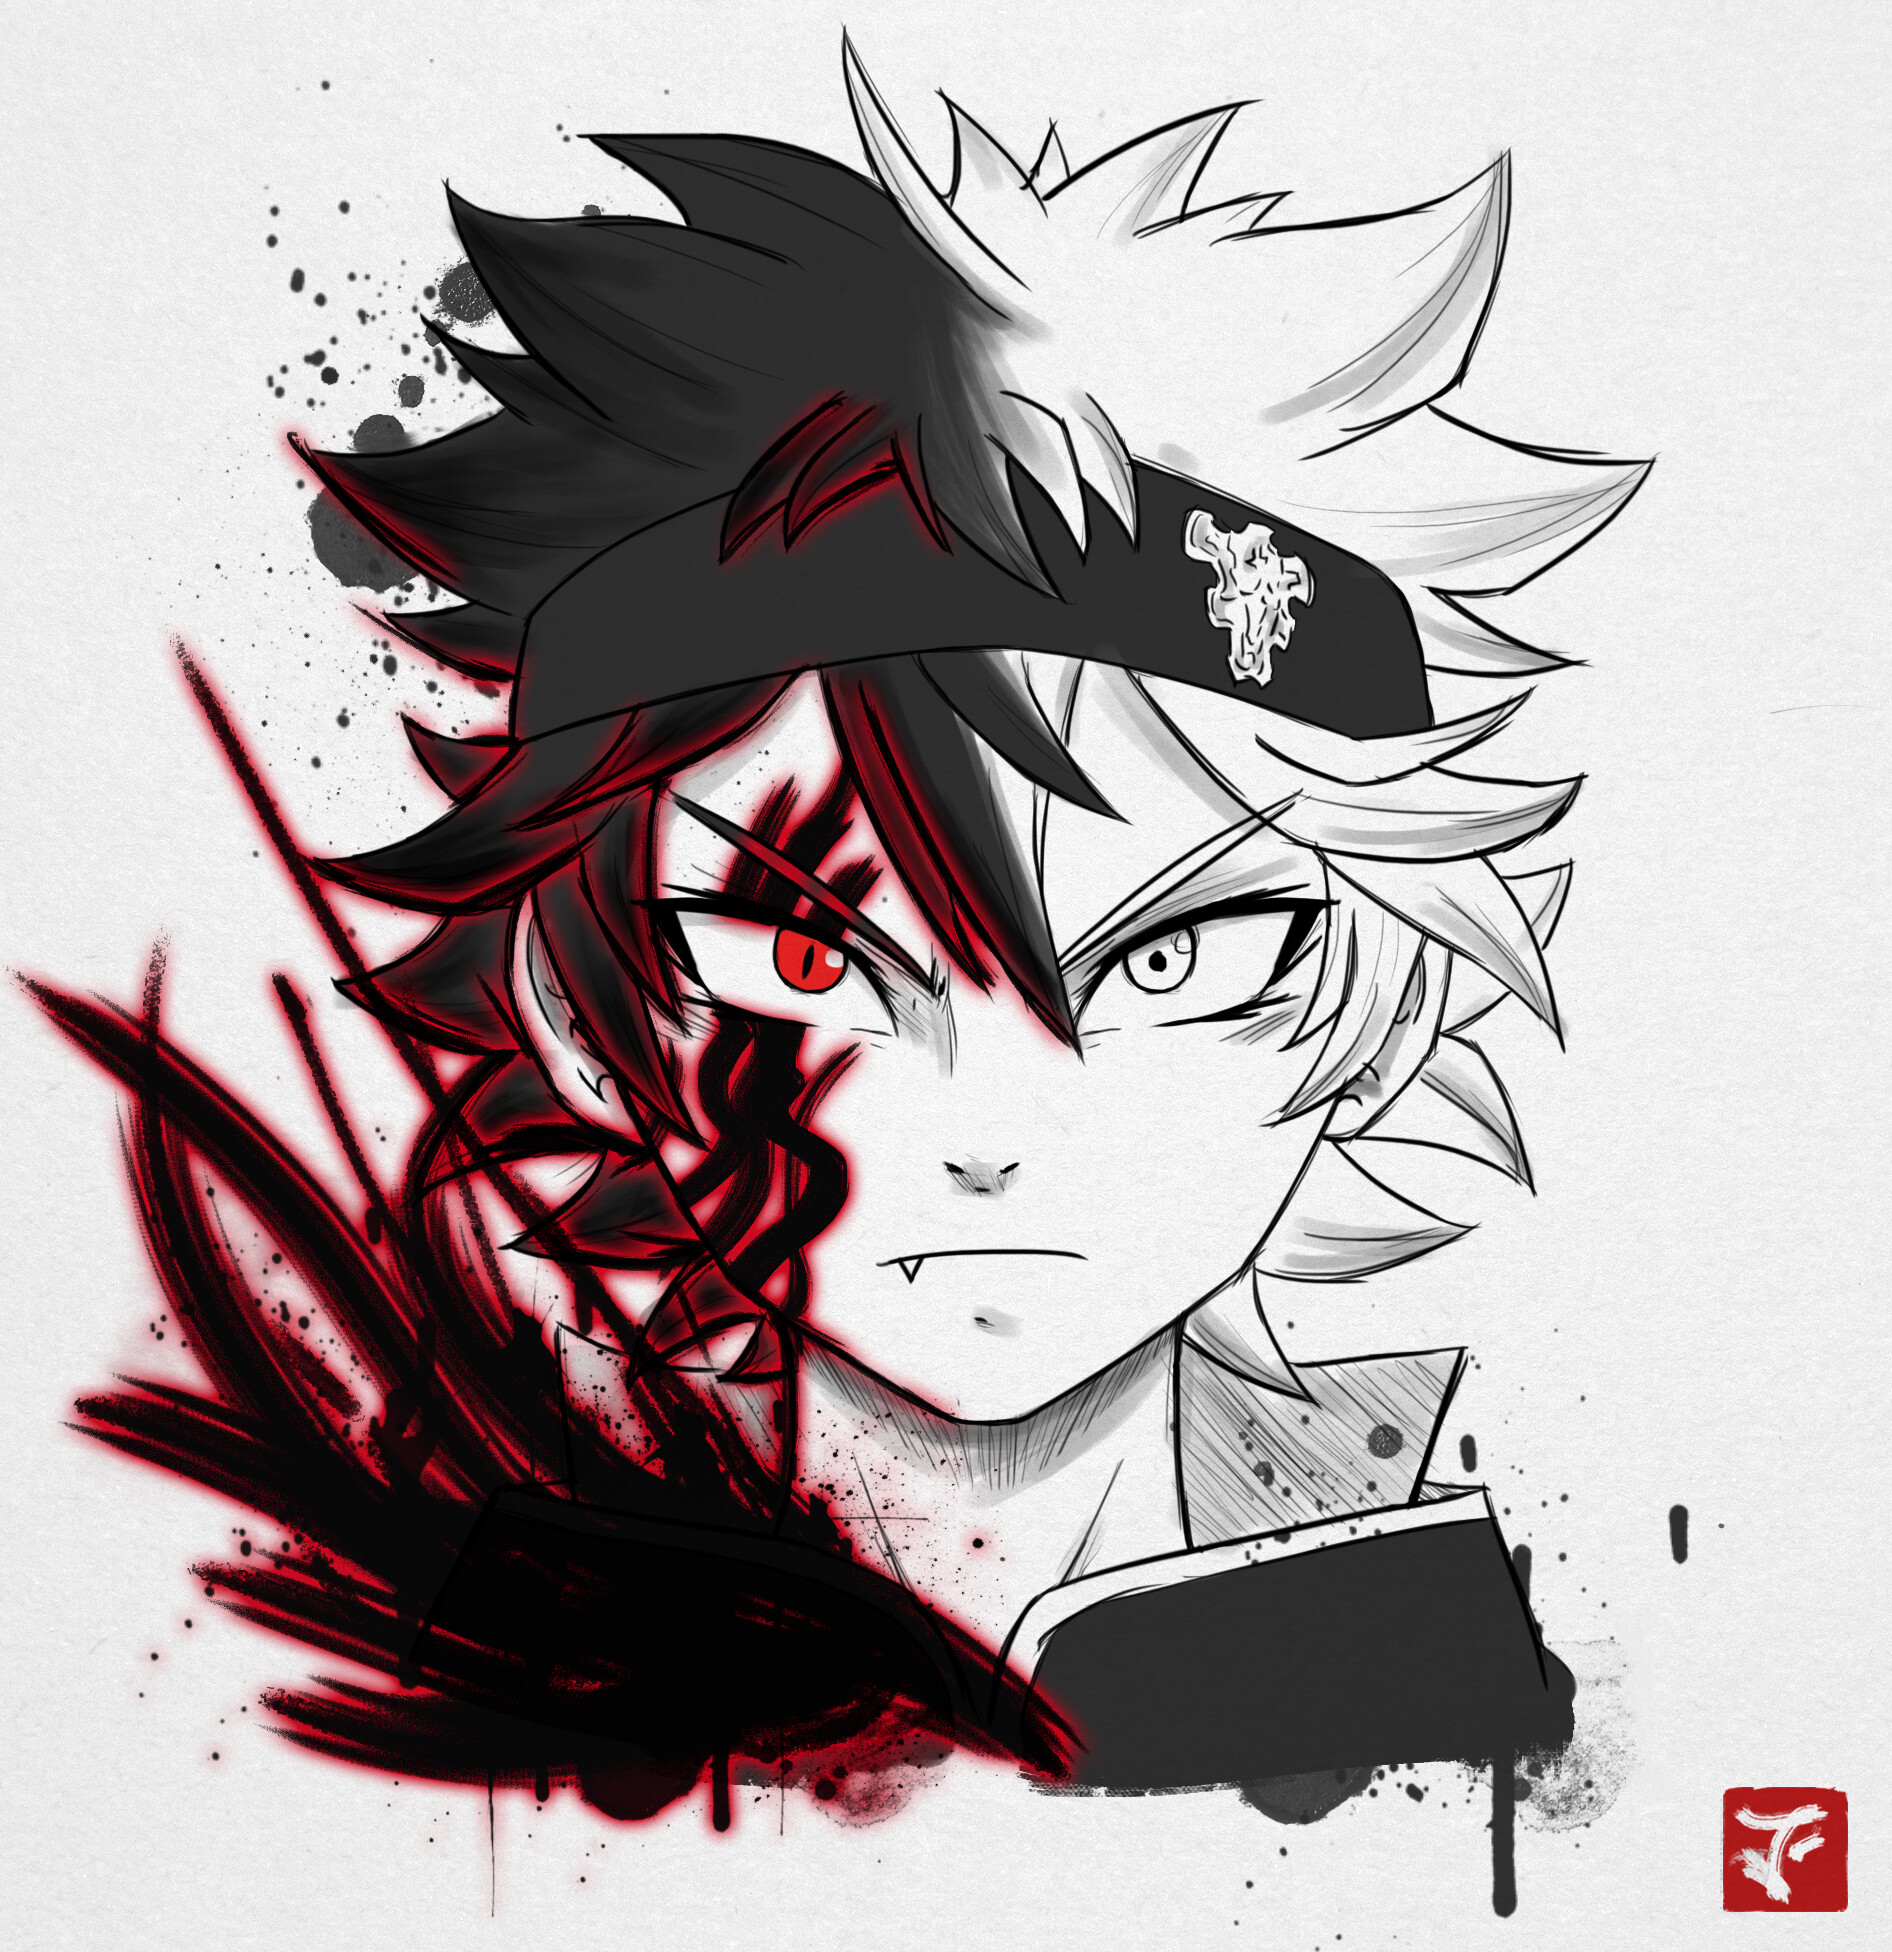 Fanart of Asta from the Anime "Black Clover"